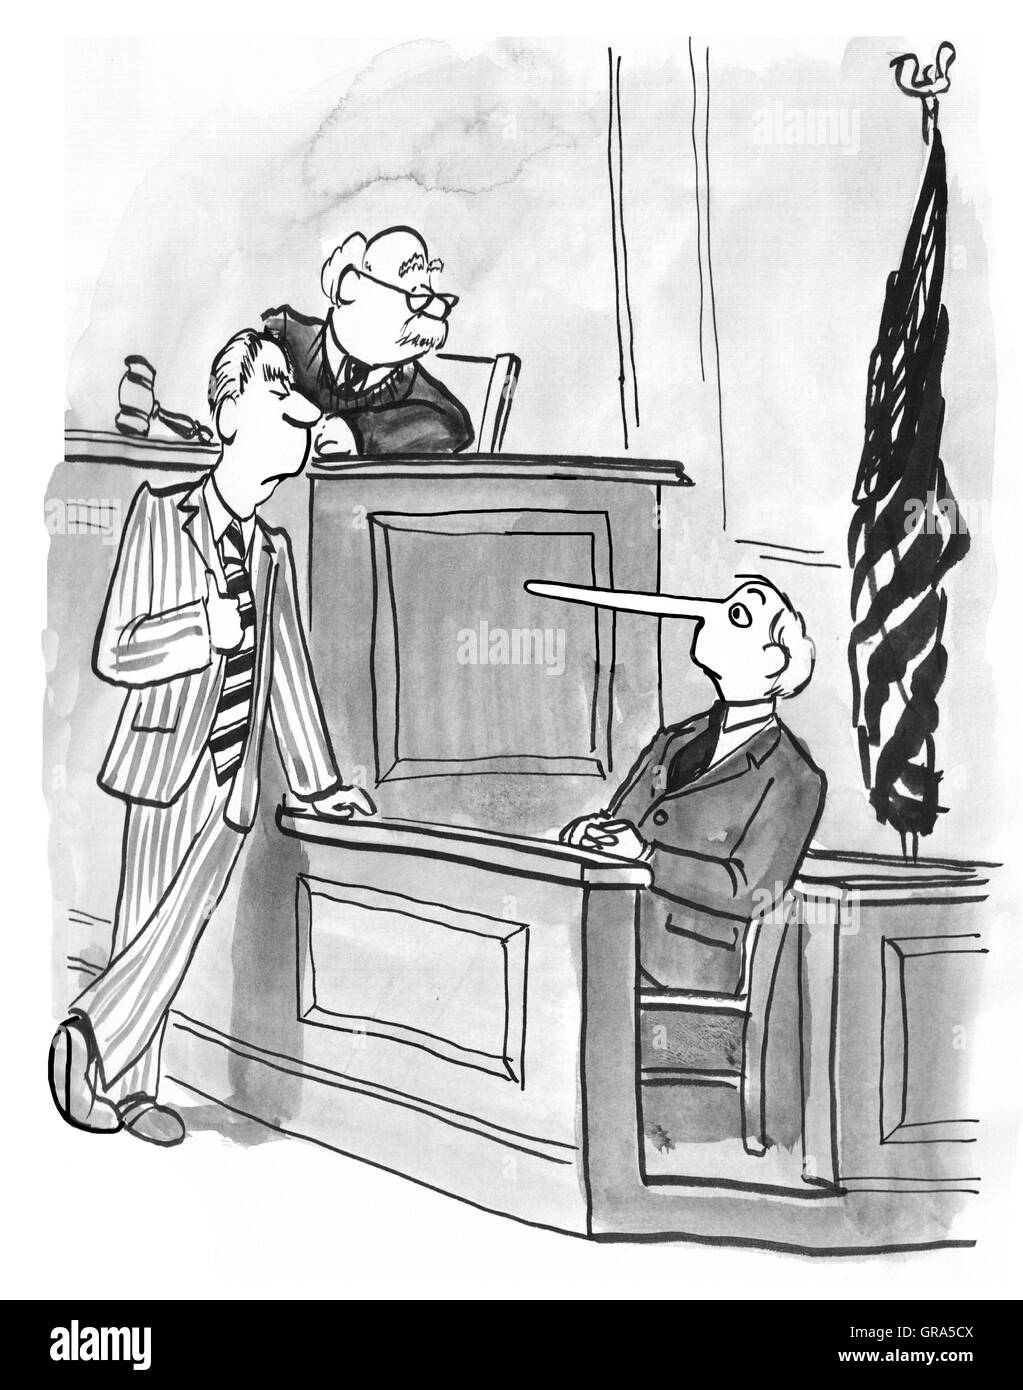 Legal illustration showing a witness being dishonest on the witness stand. Stock Photo